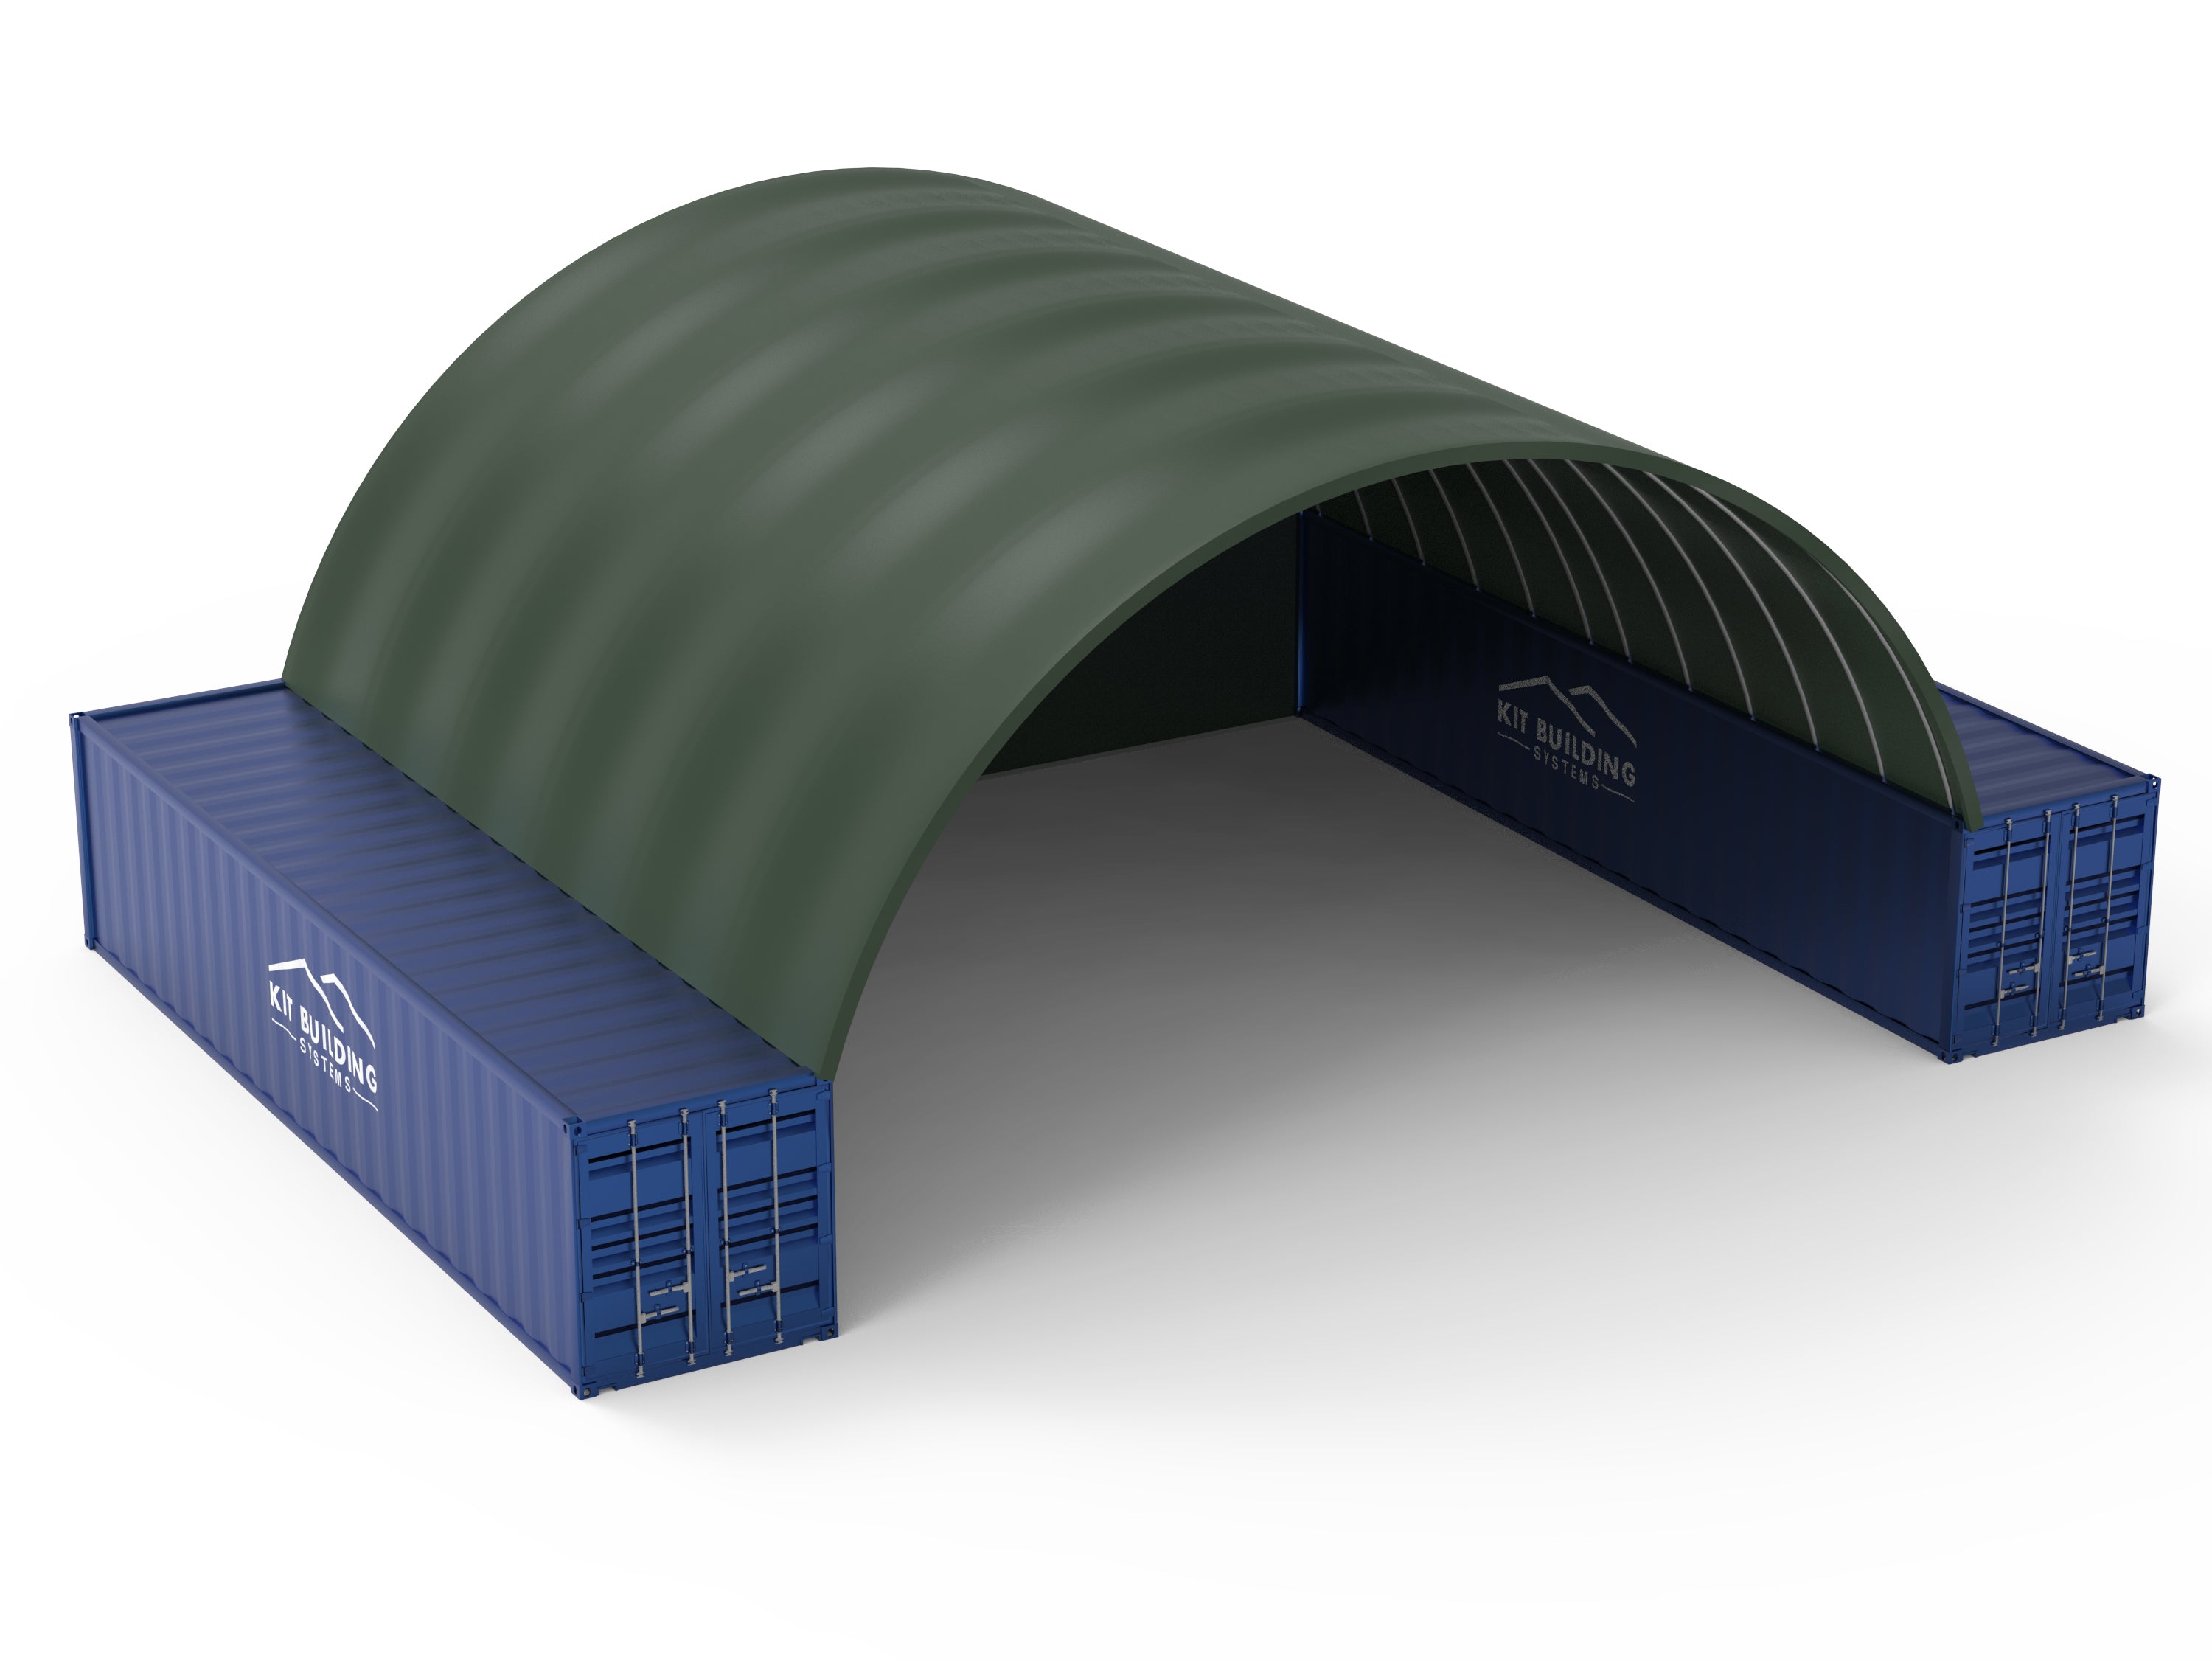 12m x 12m - Single Truss Container canopy - Closed back panel - Green